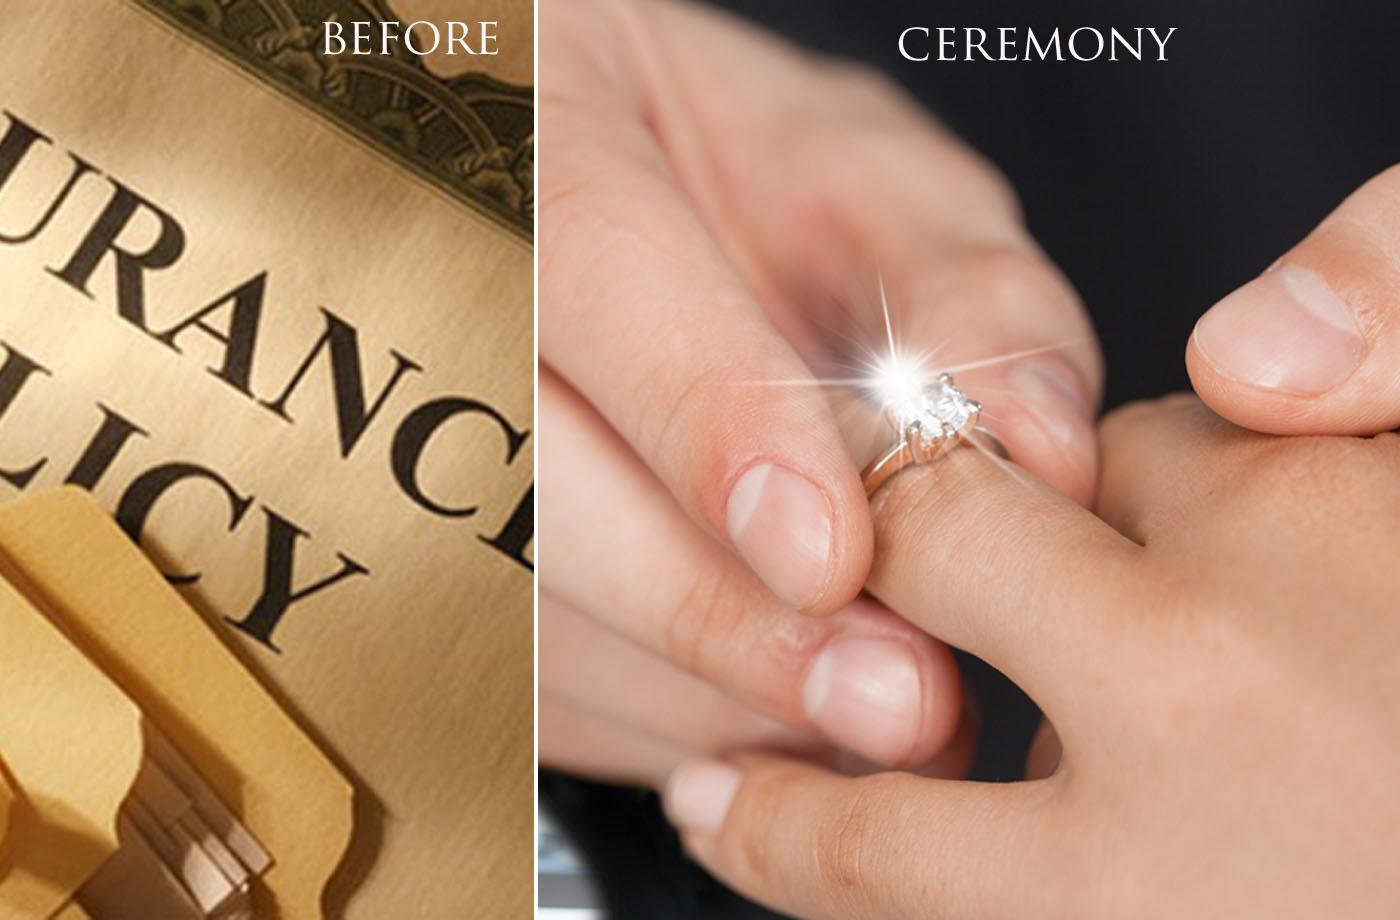 FAQ: What Should I Do with My Engagement Ring on my Wedding Day?